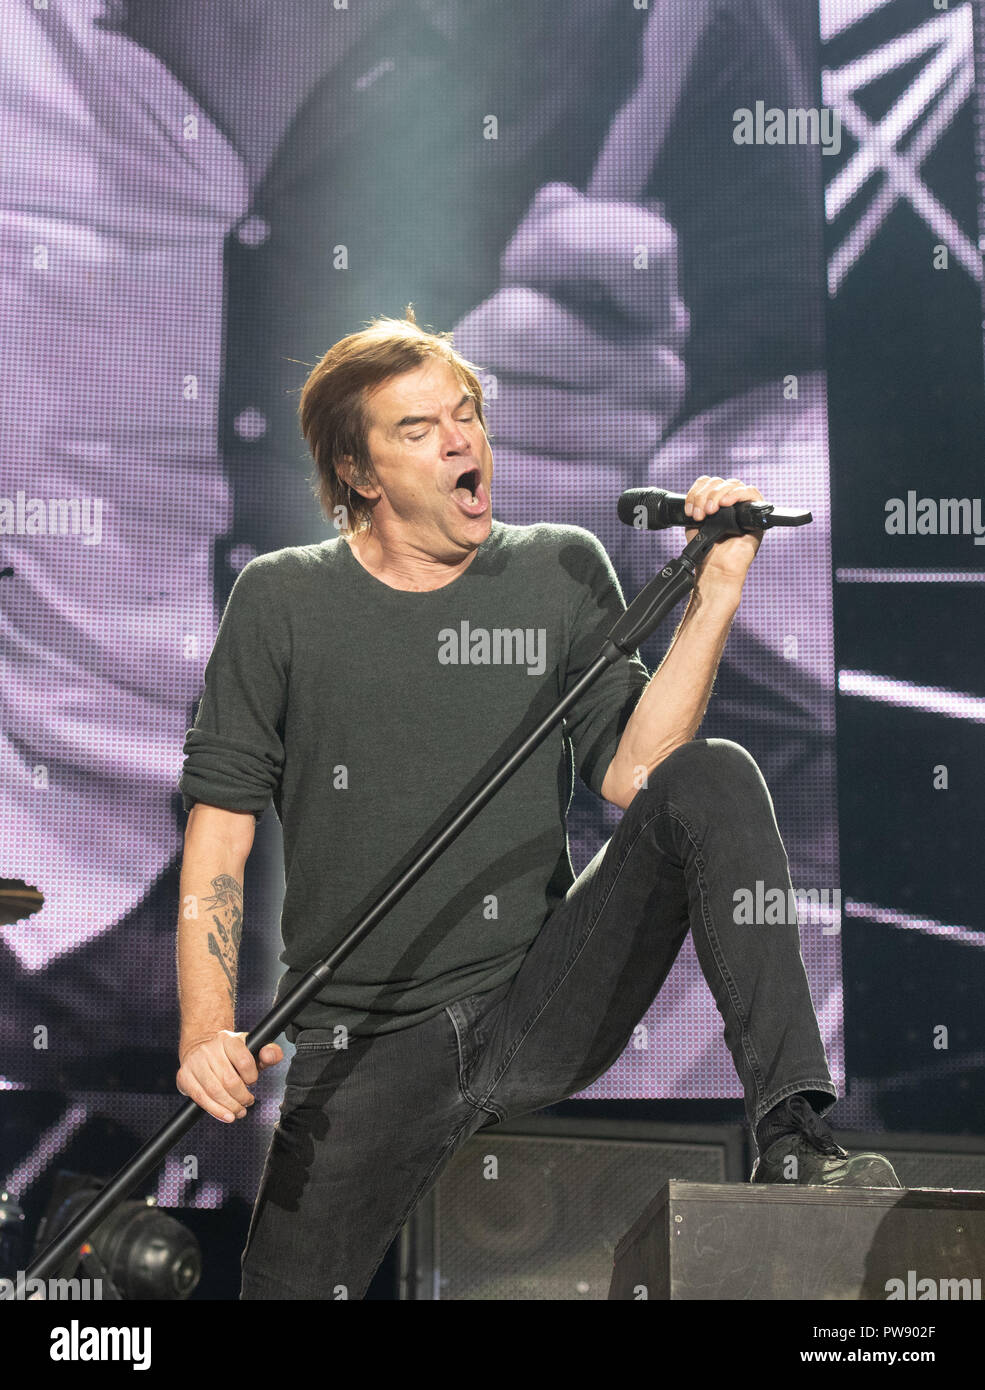 13 October 2018, North Rhine-Westphalia, Duesseldorf: 13 October 2018,  Germany, Duesseldorf: Frontman Campino of the band "Die Toten Hosen" stands  with his microphone stand at the edge of the stage. About 1.3